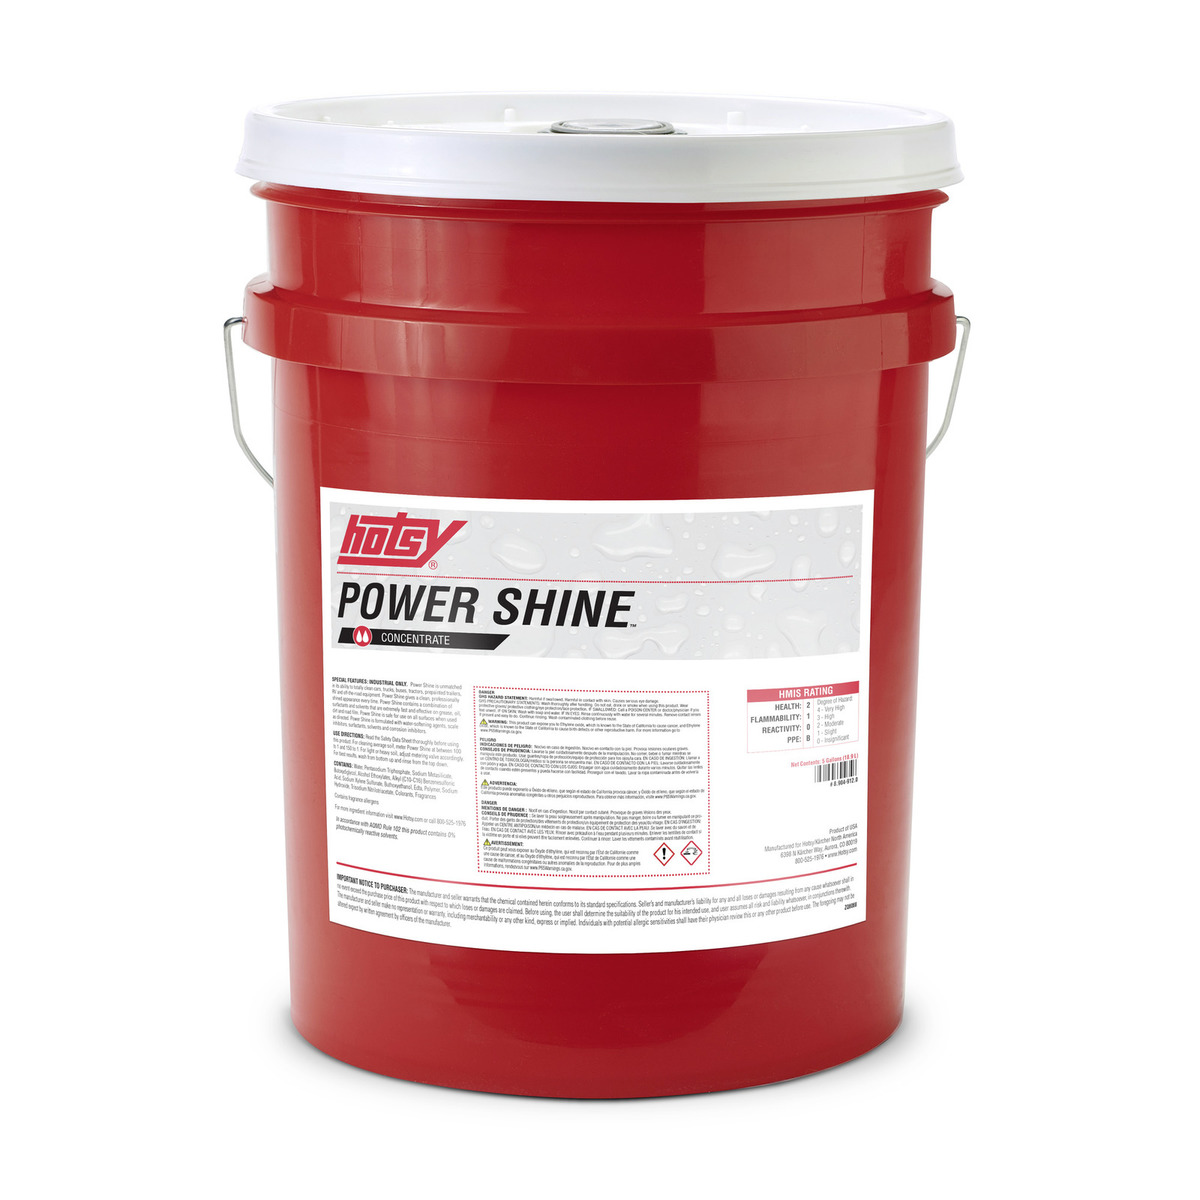 Power Shine – Concentrated Biodegradable Detergent for Pressure Washers